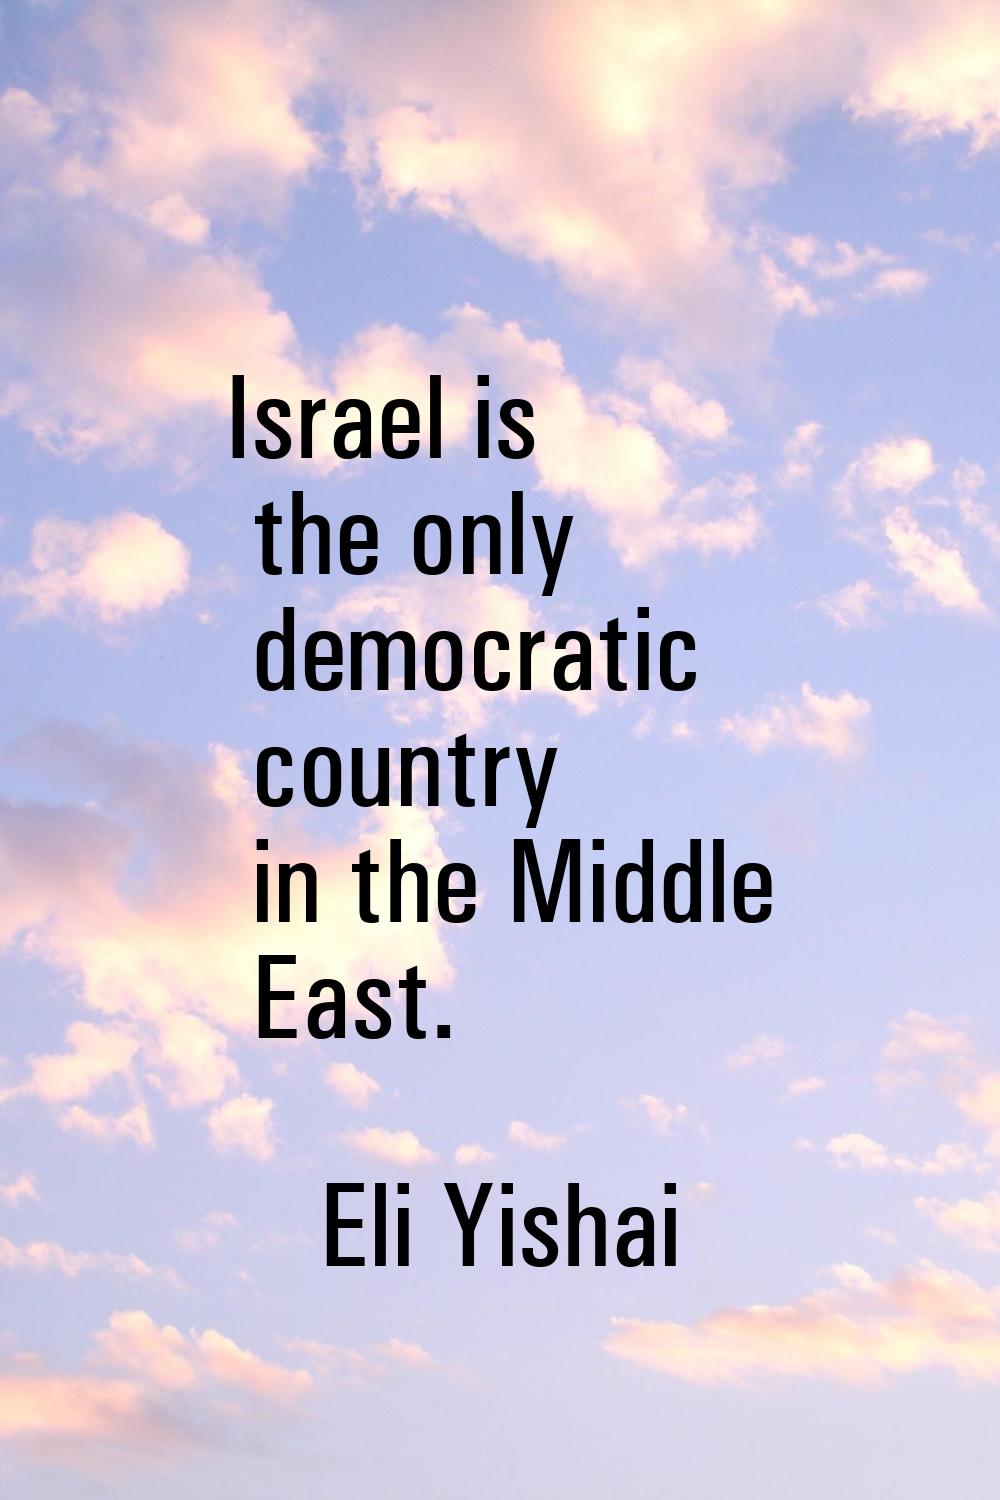 Israel is the only democratic country in the Middle East.